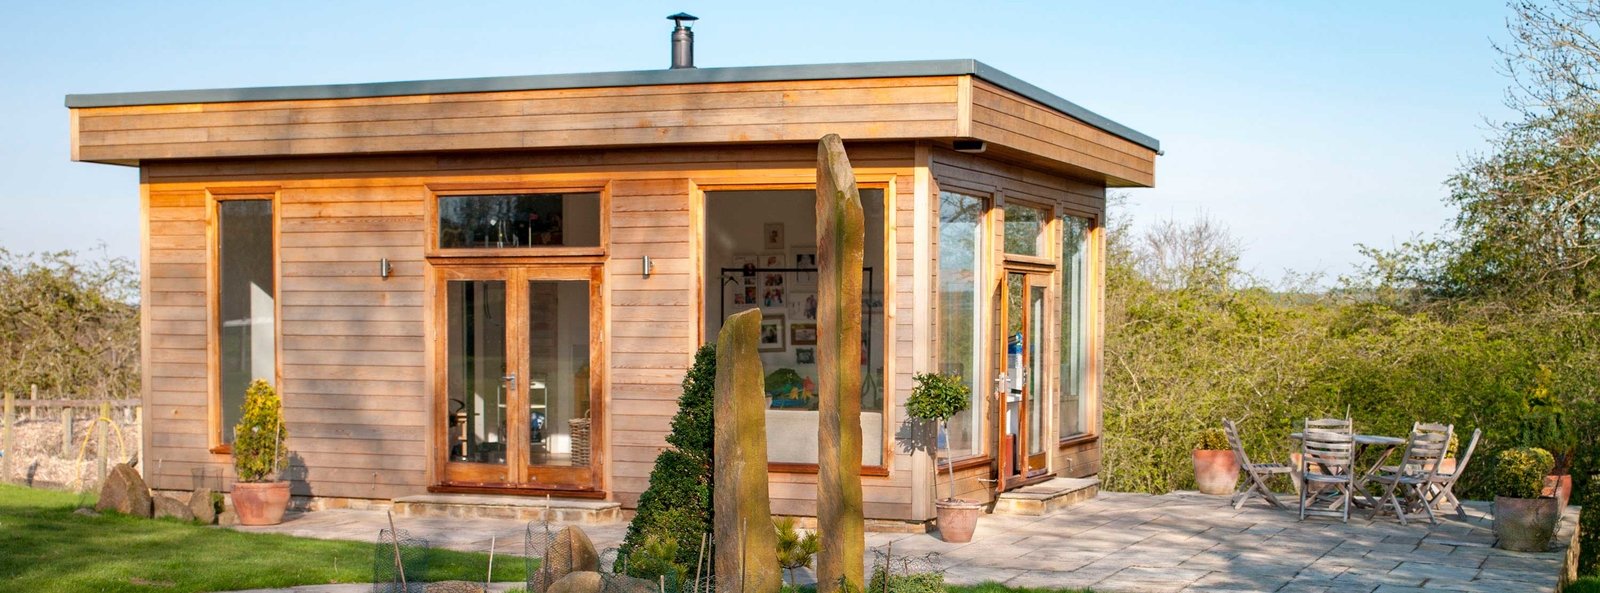 Can a garden office really add value to your home?